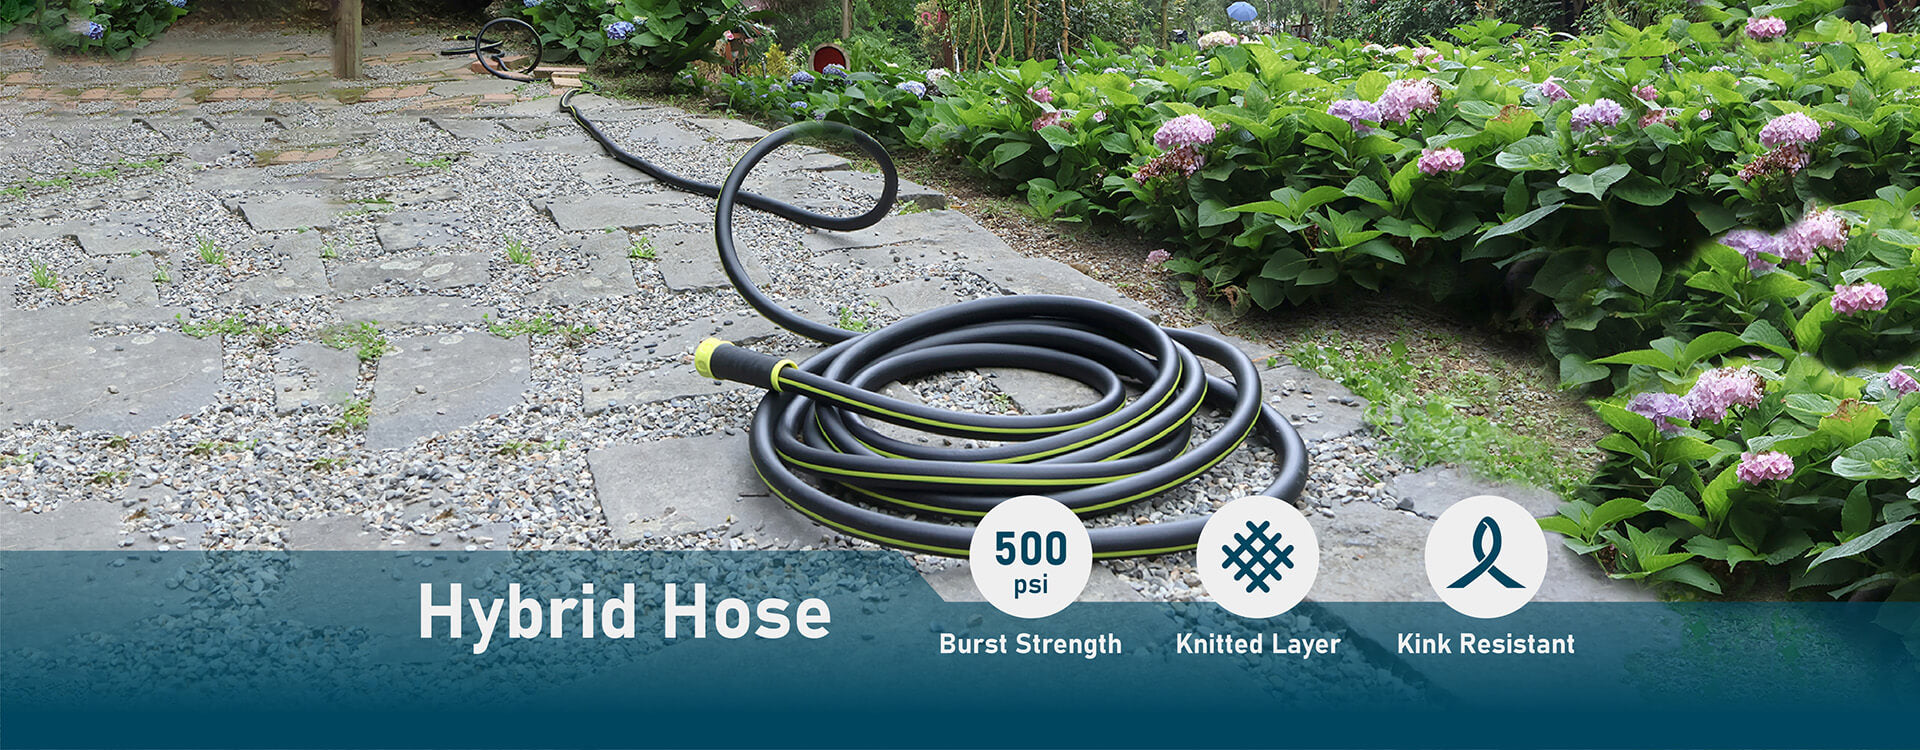 Paraden Hybrid Hose features of strength, knitted layer and kink resistant